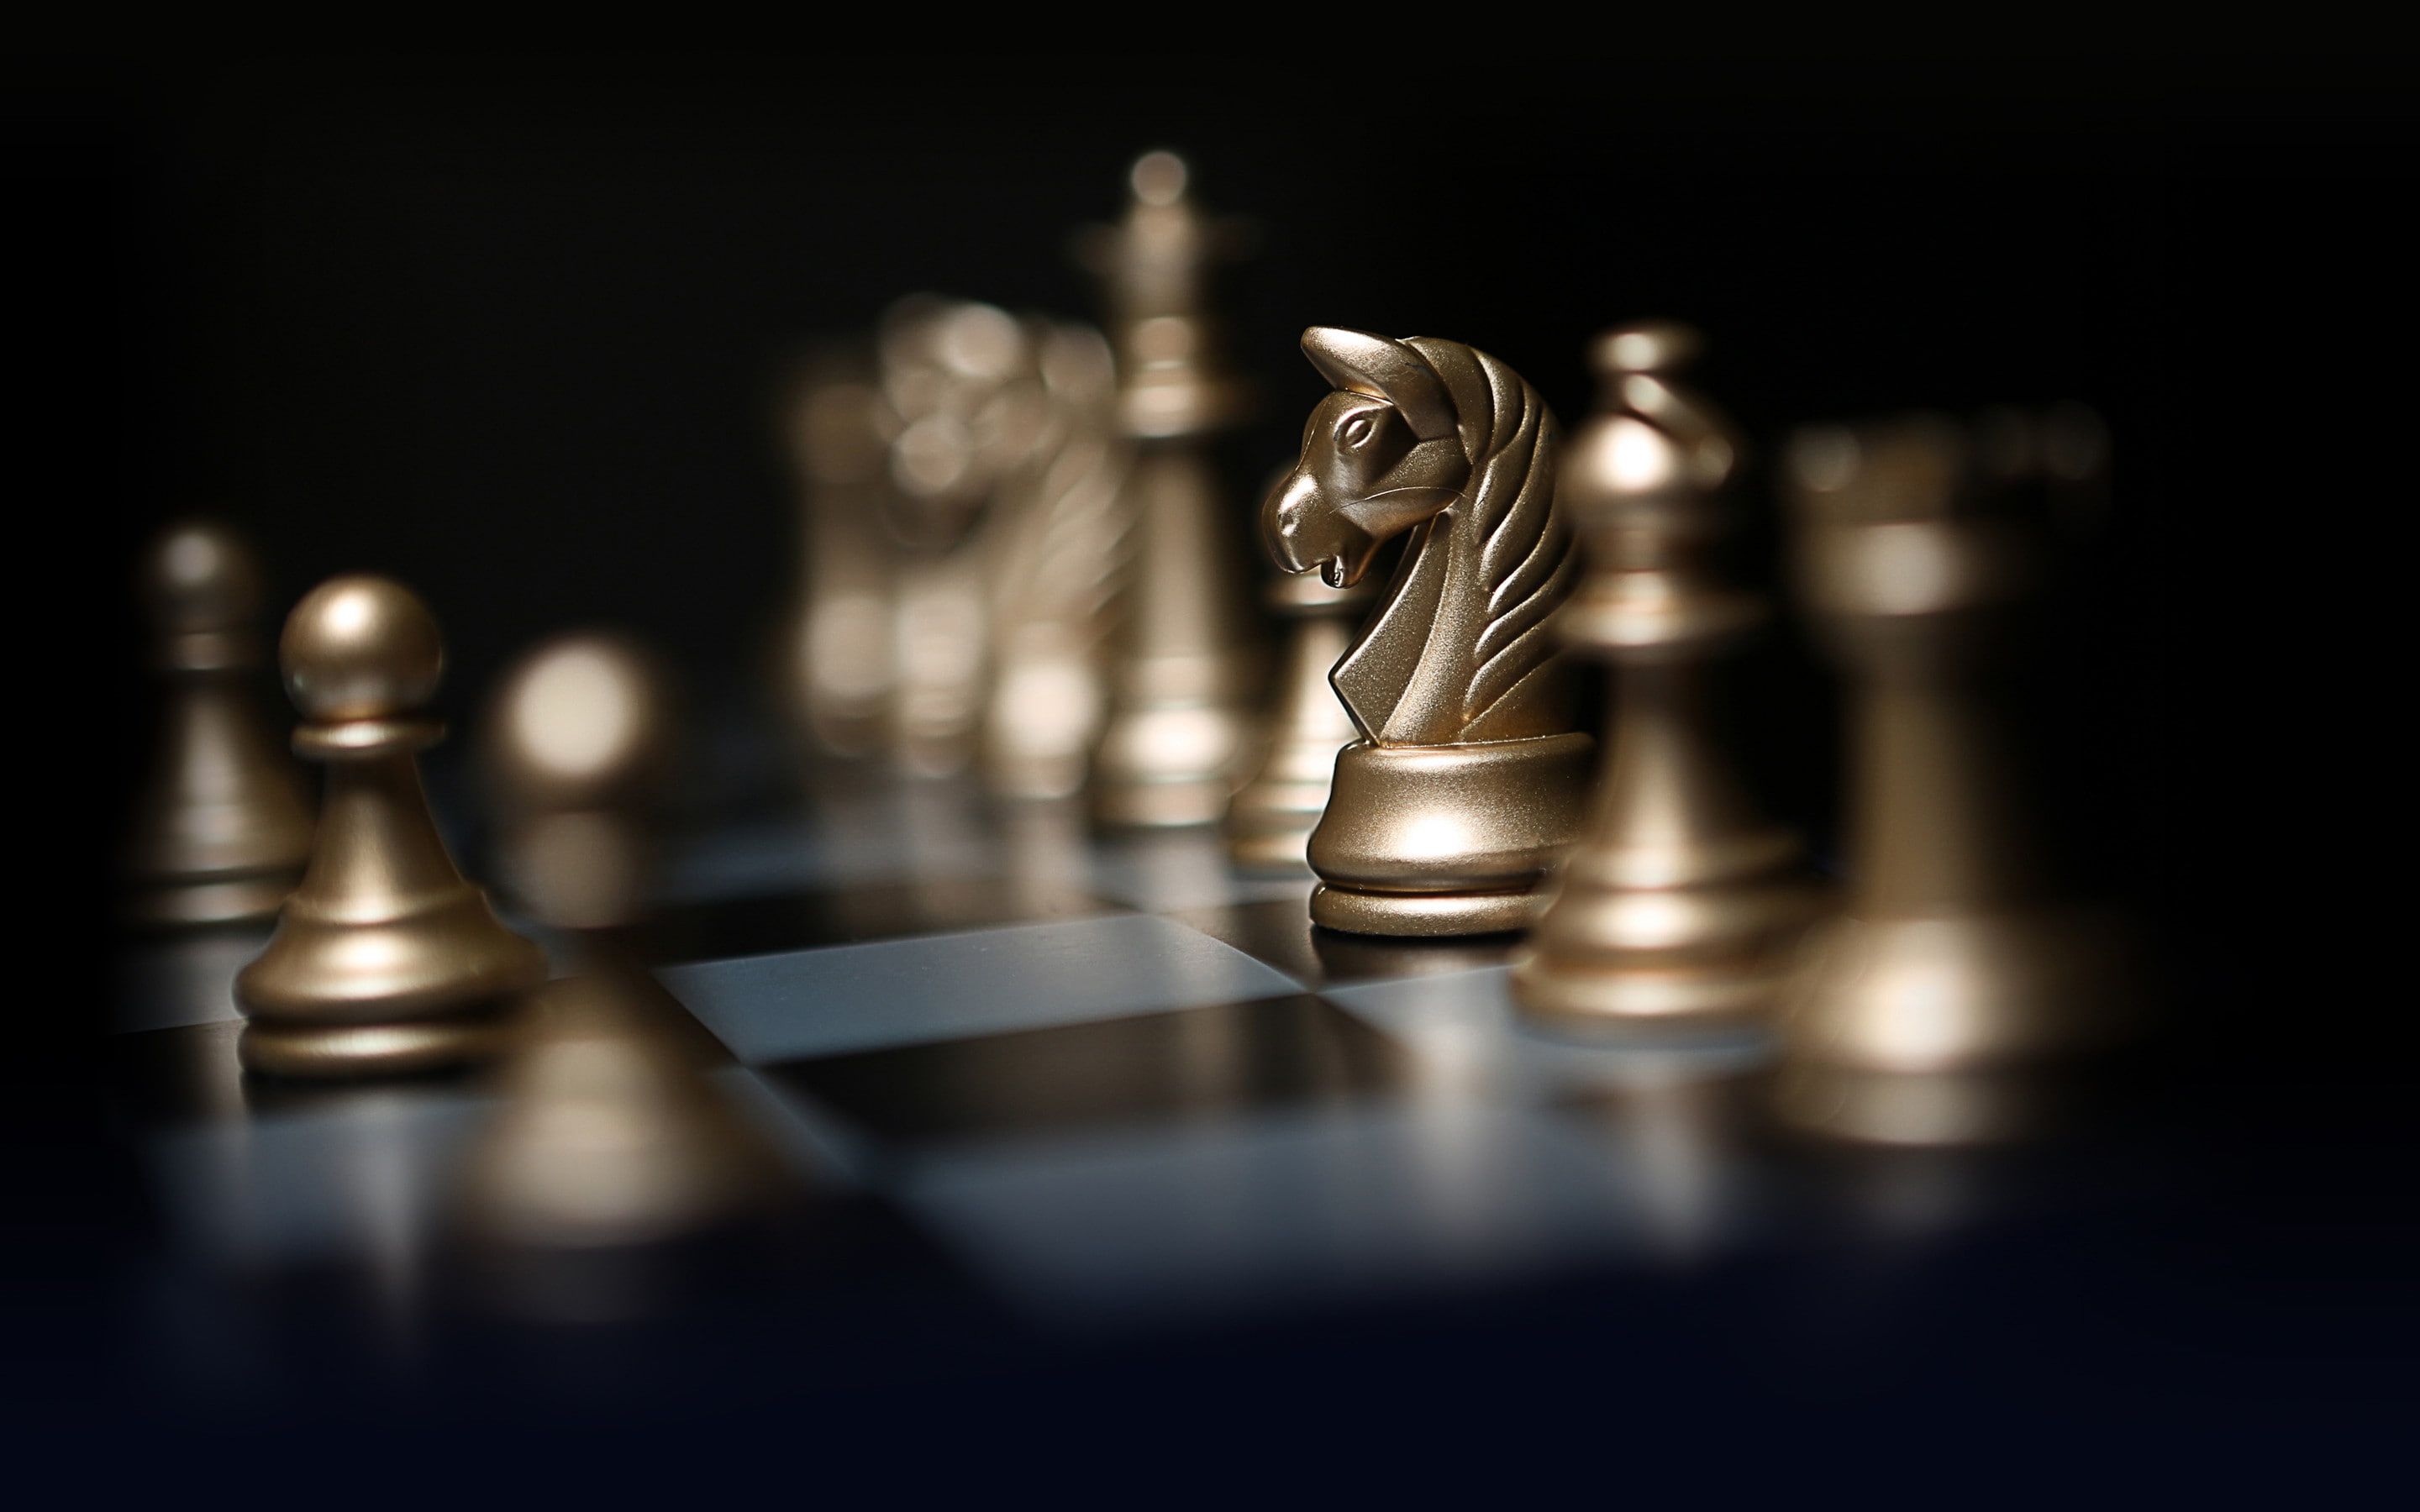 Chess pieces on a chess board, with a knight piece in focus. - Chess